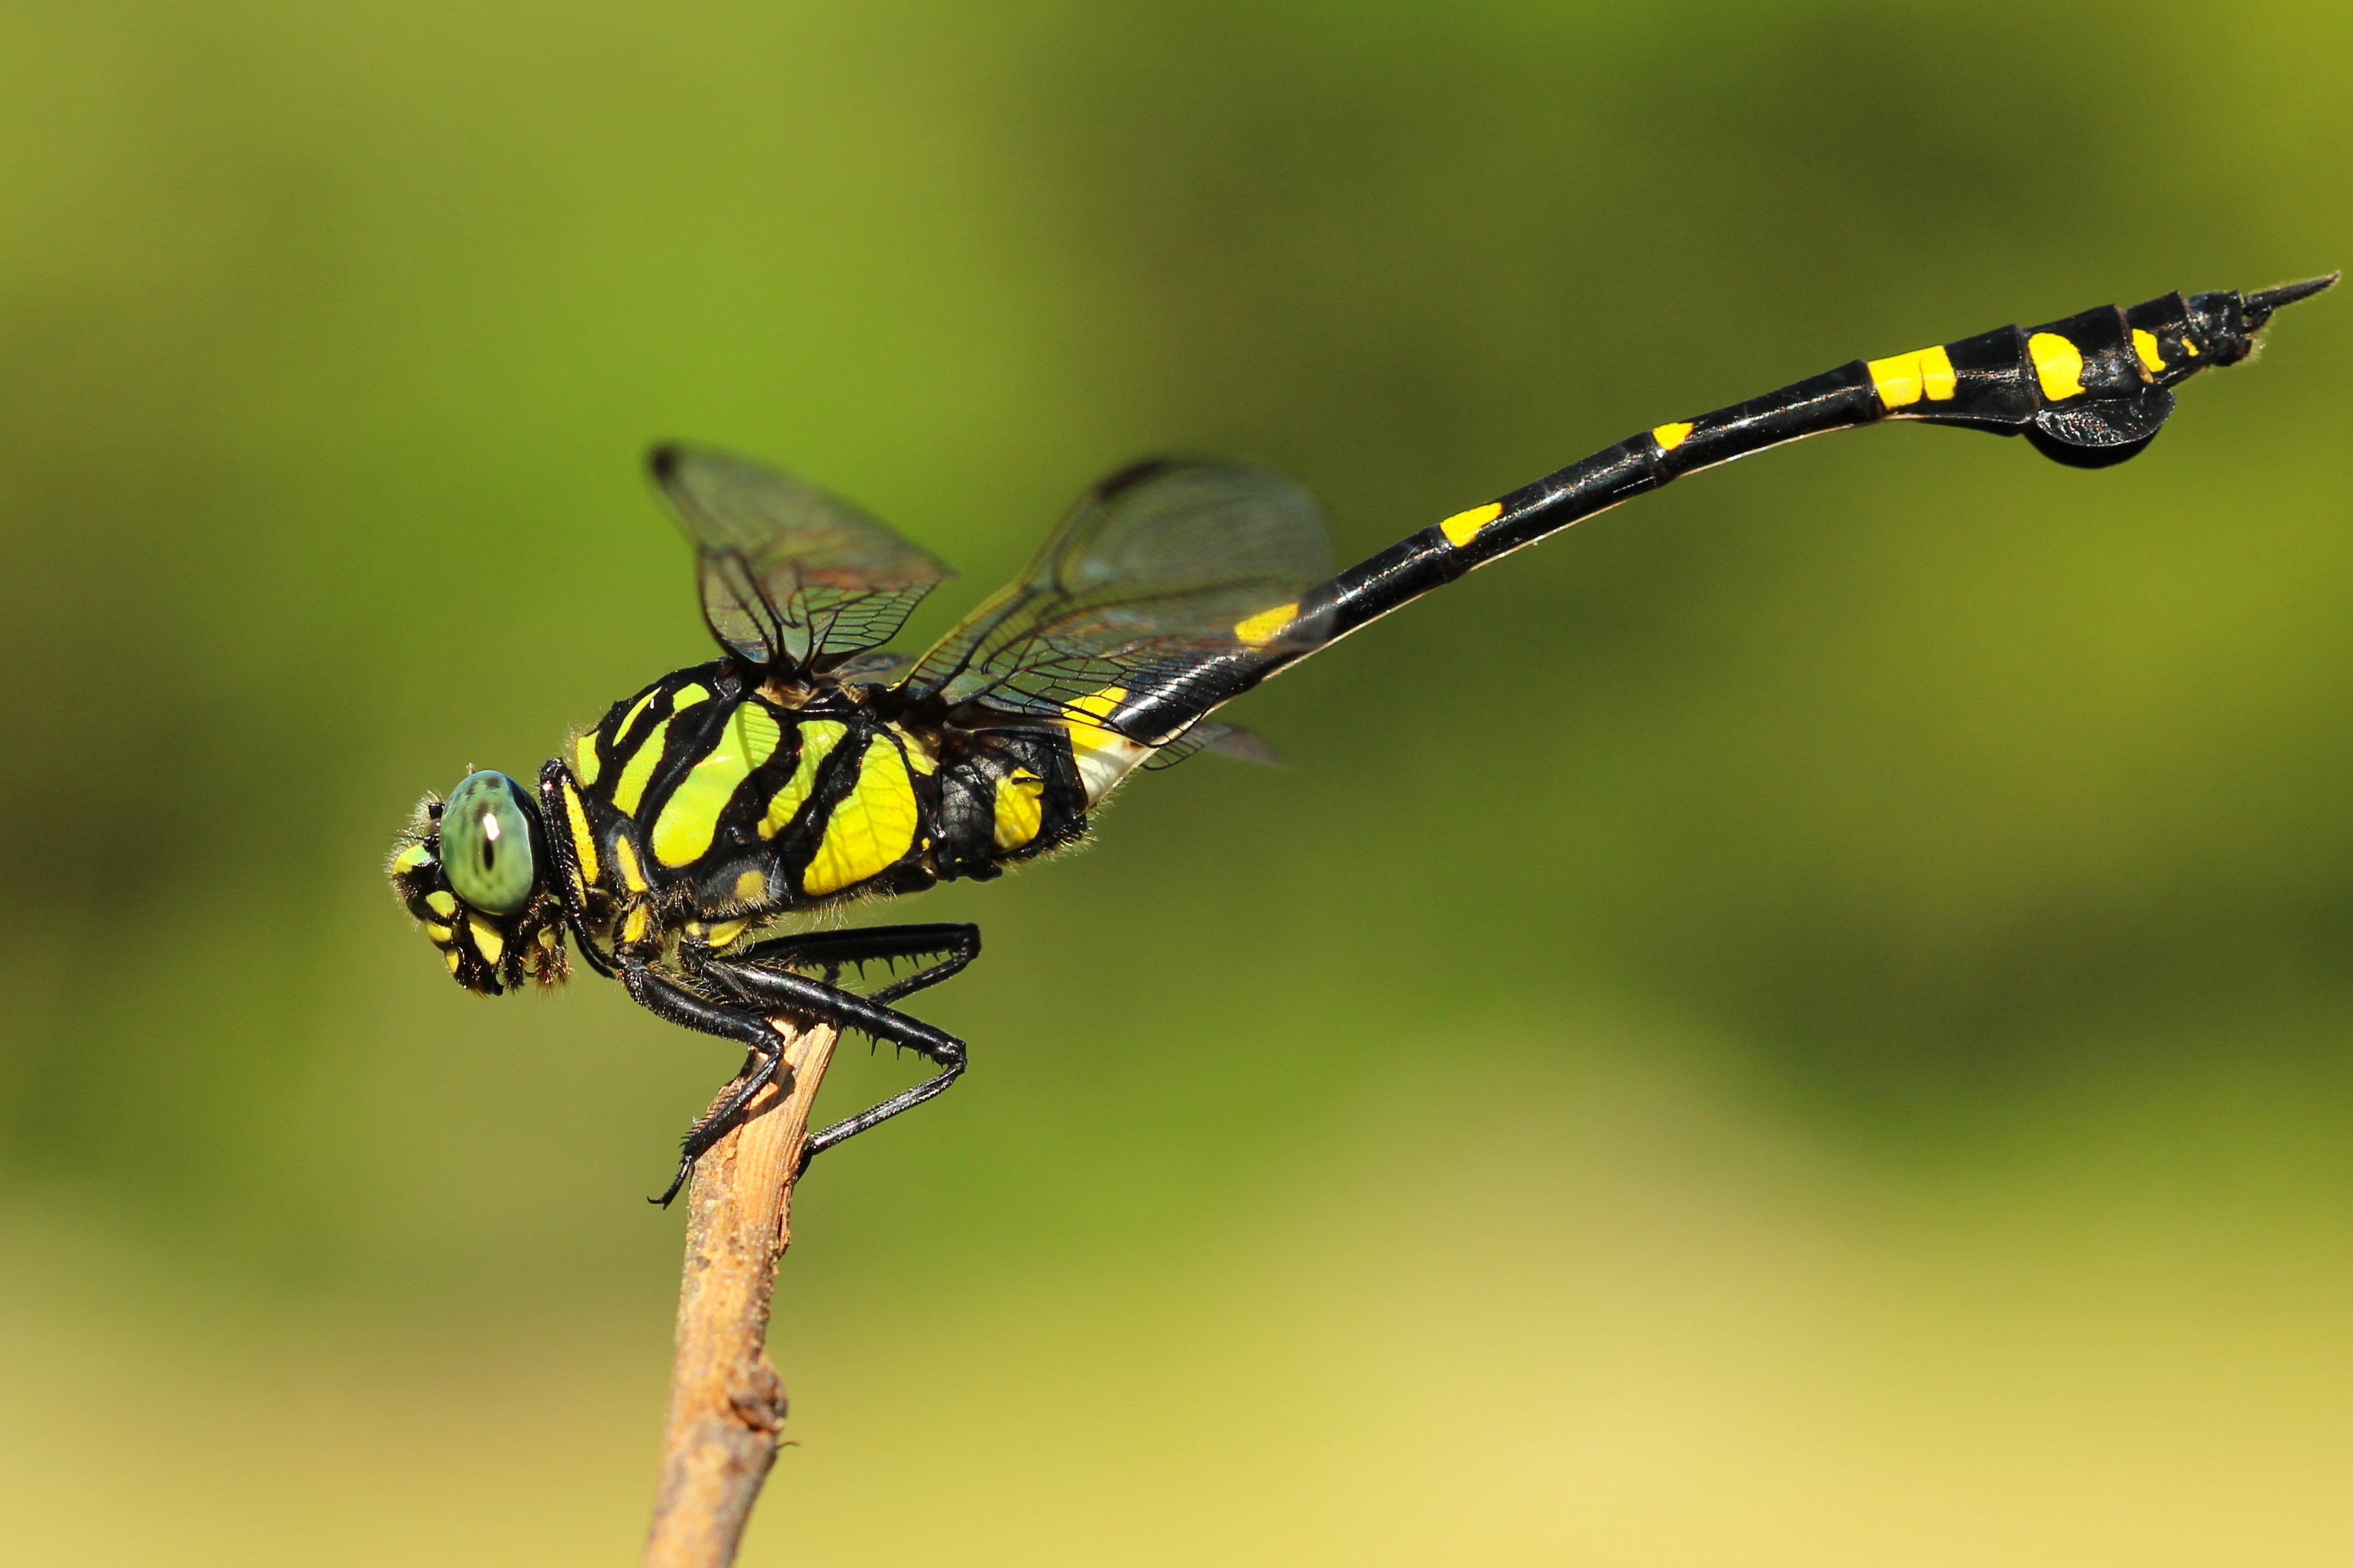 black-and-green dragonfly